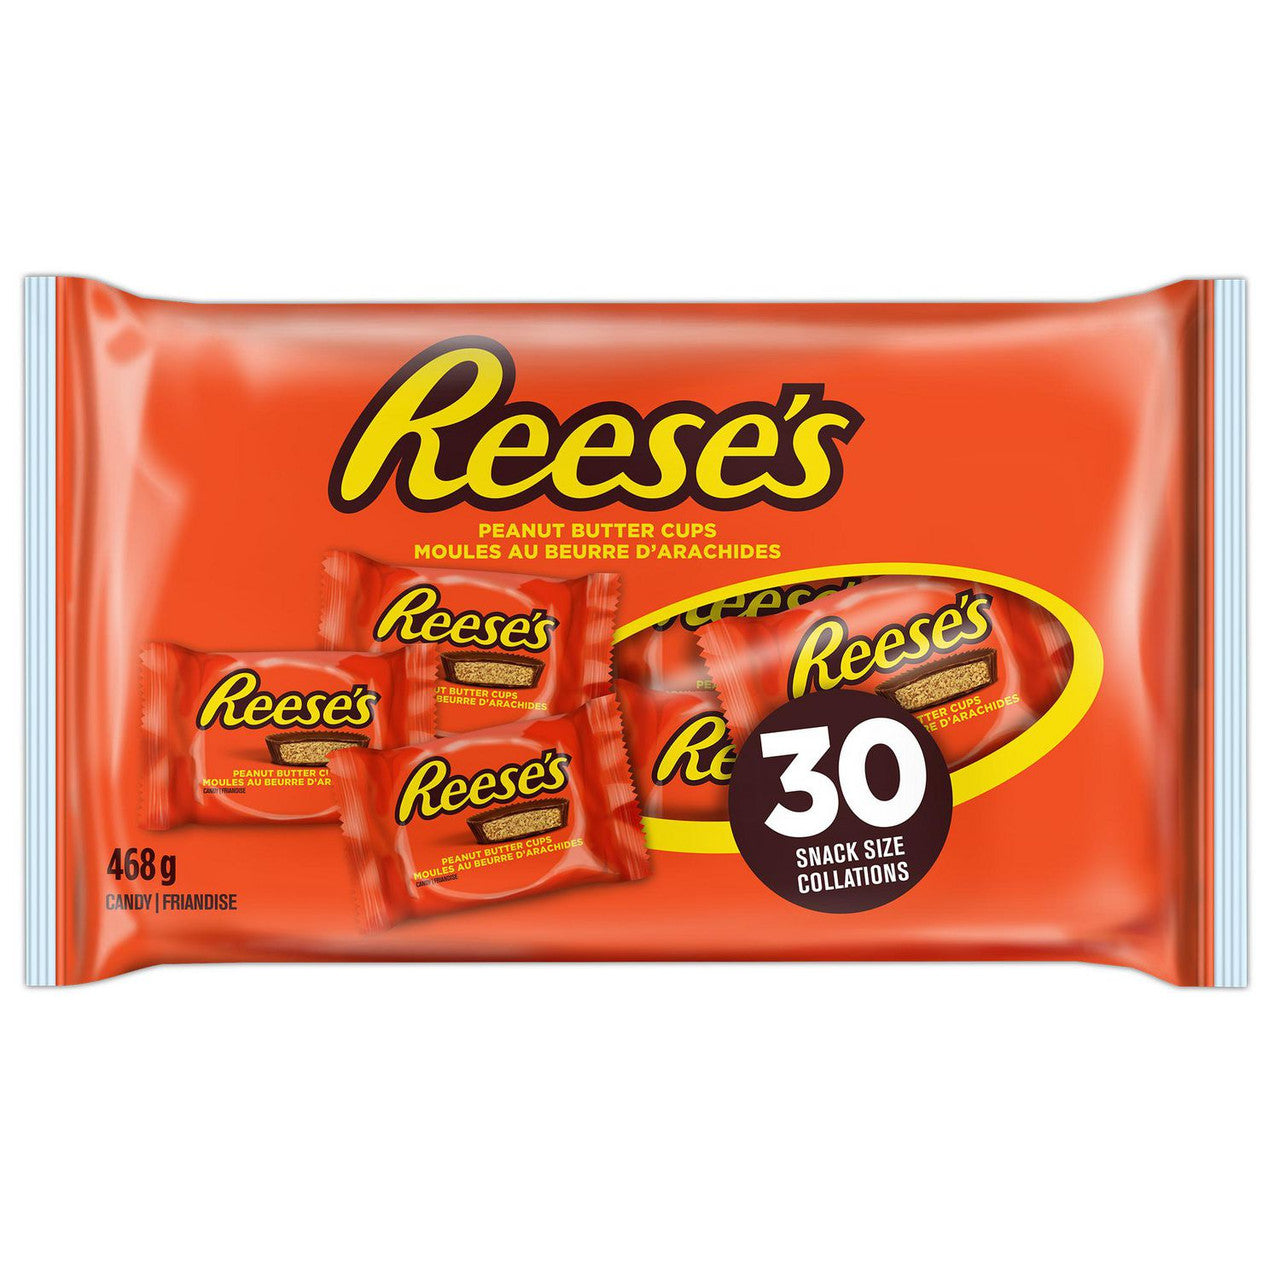 Reese's Peanut Butter Cup Snack Size Halloween Candy, 30ct Bag, 468g/1 lb. {Imported from Canada}